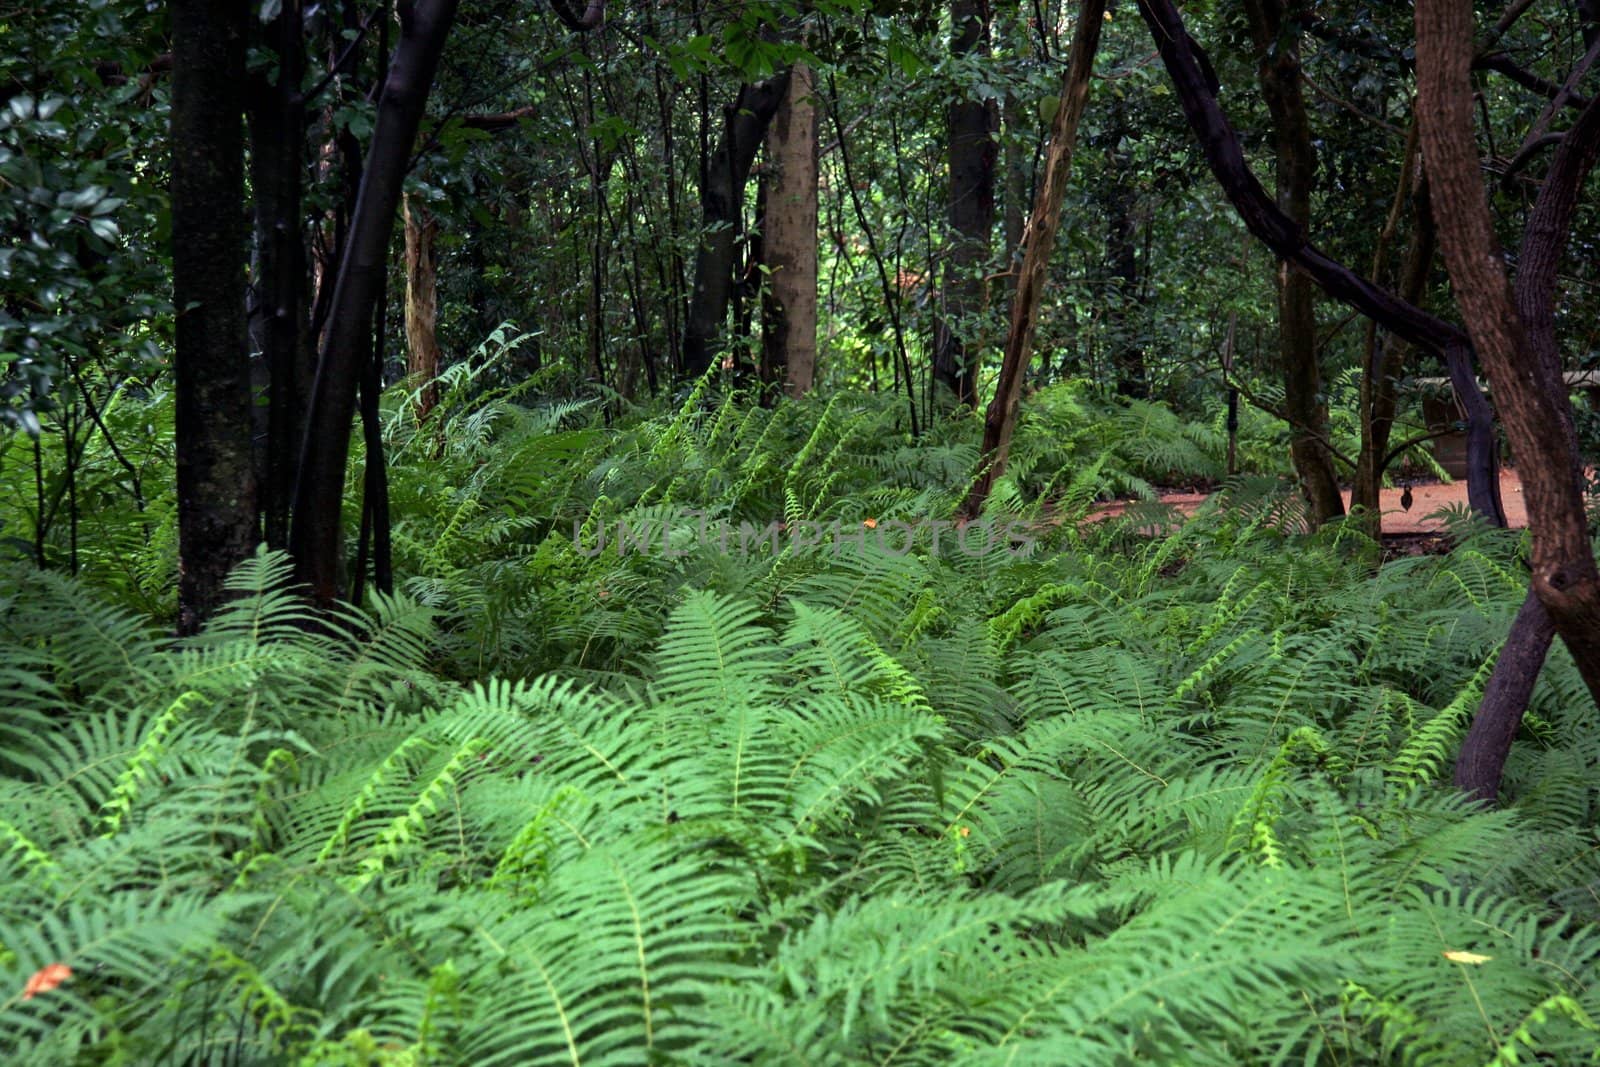 A forest floor covered in lush ferns